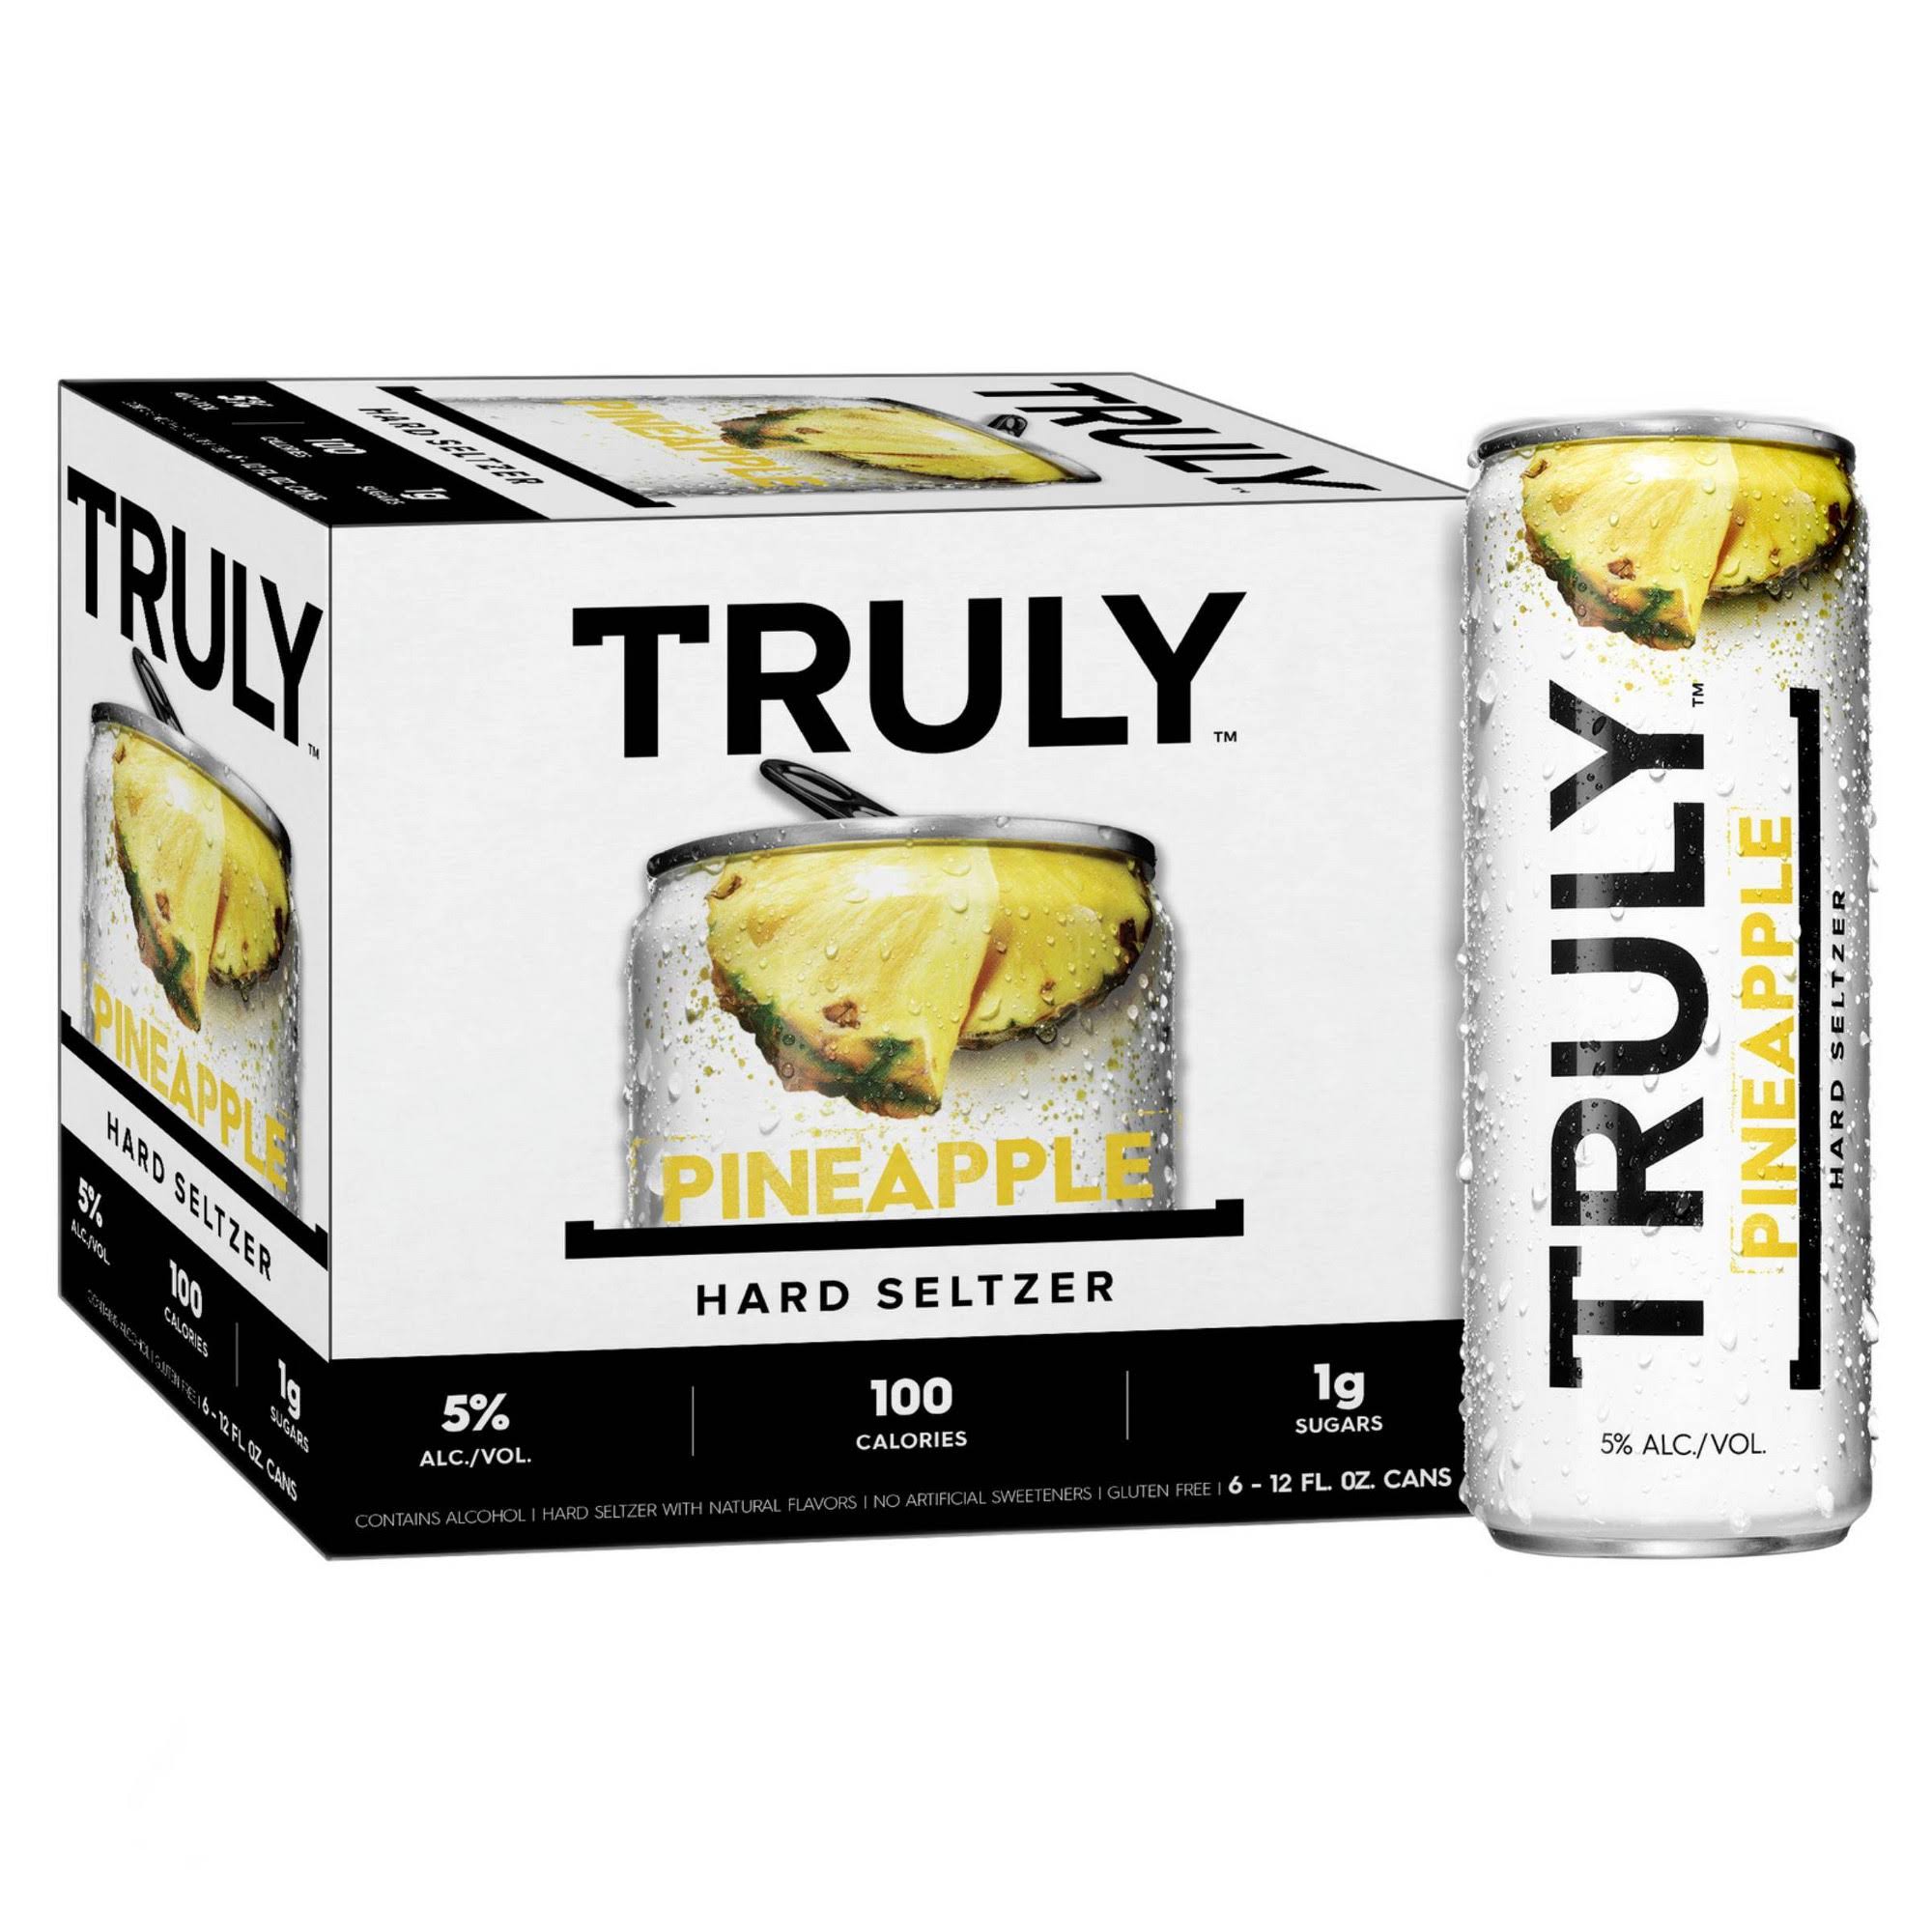 Truly Hard Seltzer, Pineapple - 6 pack, 12 fl oz cans